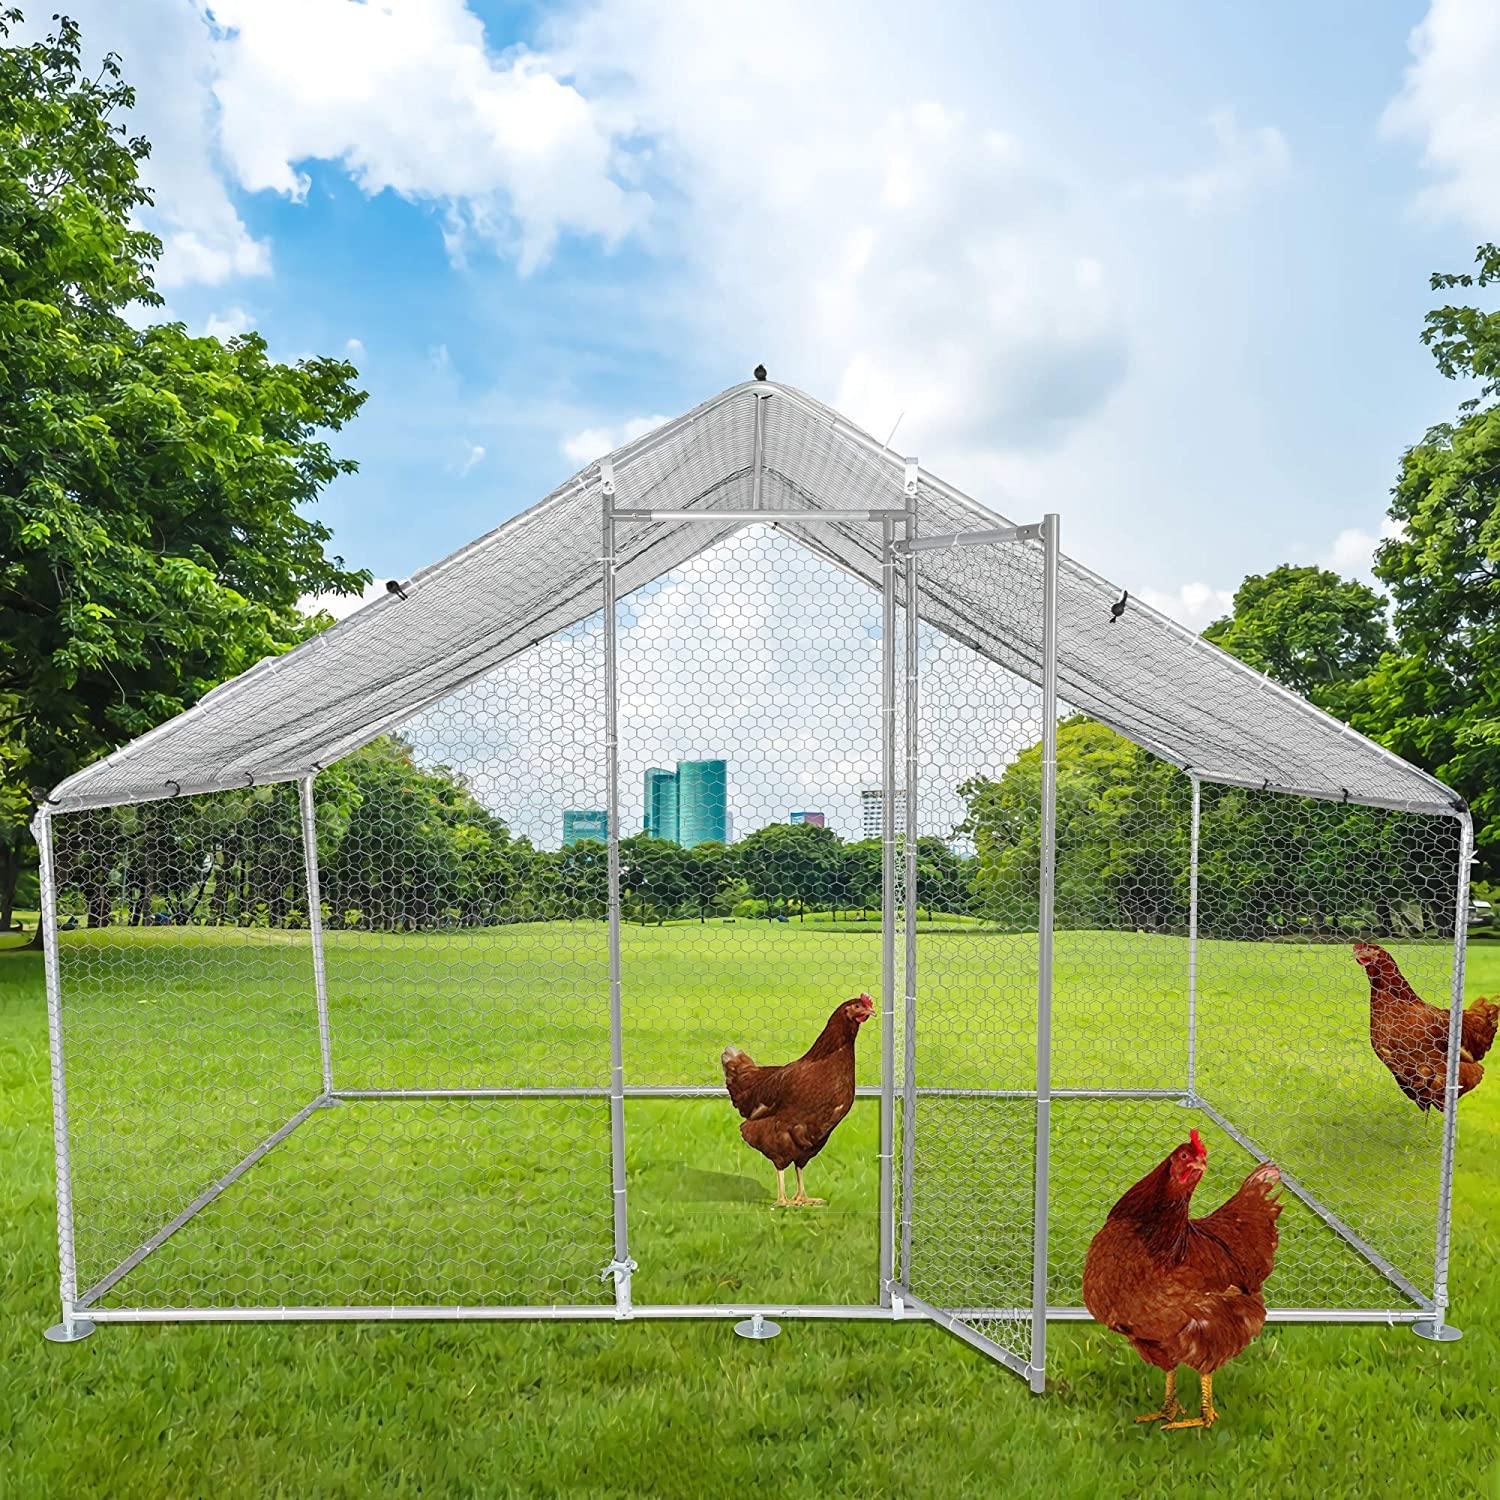 Outdoor Metal Chicken Coop Large Walk-in Poultry Cage Backyard Hen House with Chicken Run Cover for Farm Home Use 10x6.5x6.5ft - Bosonshop